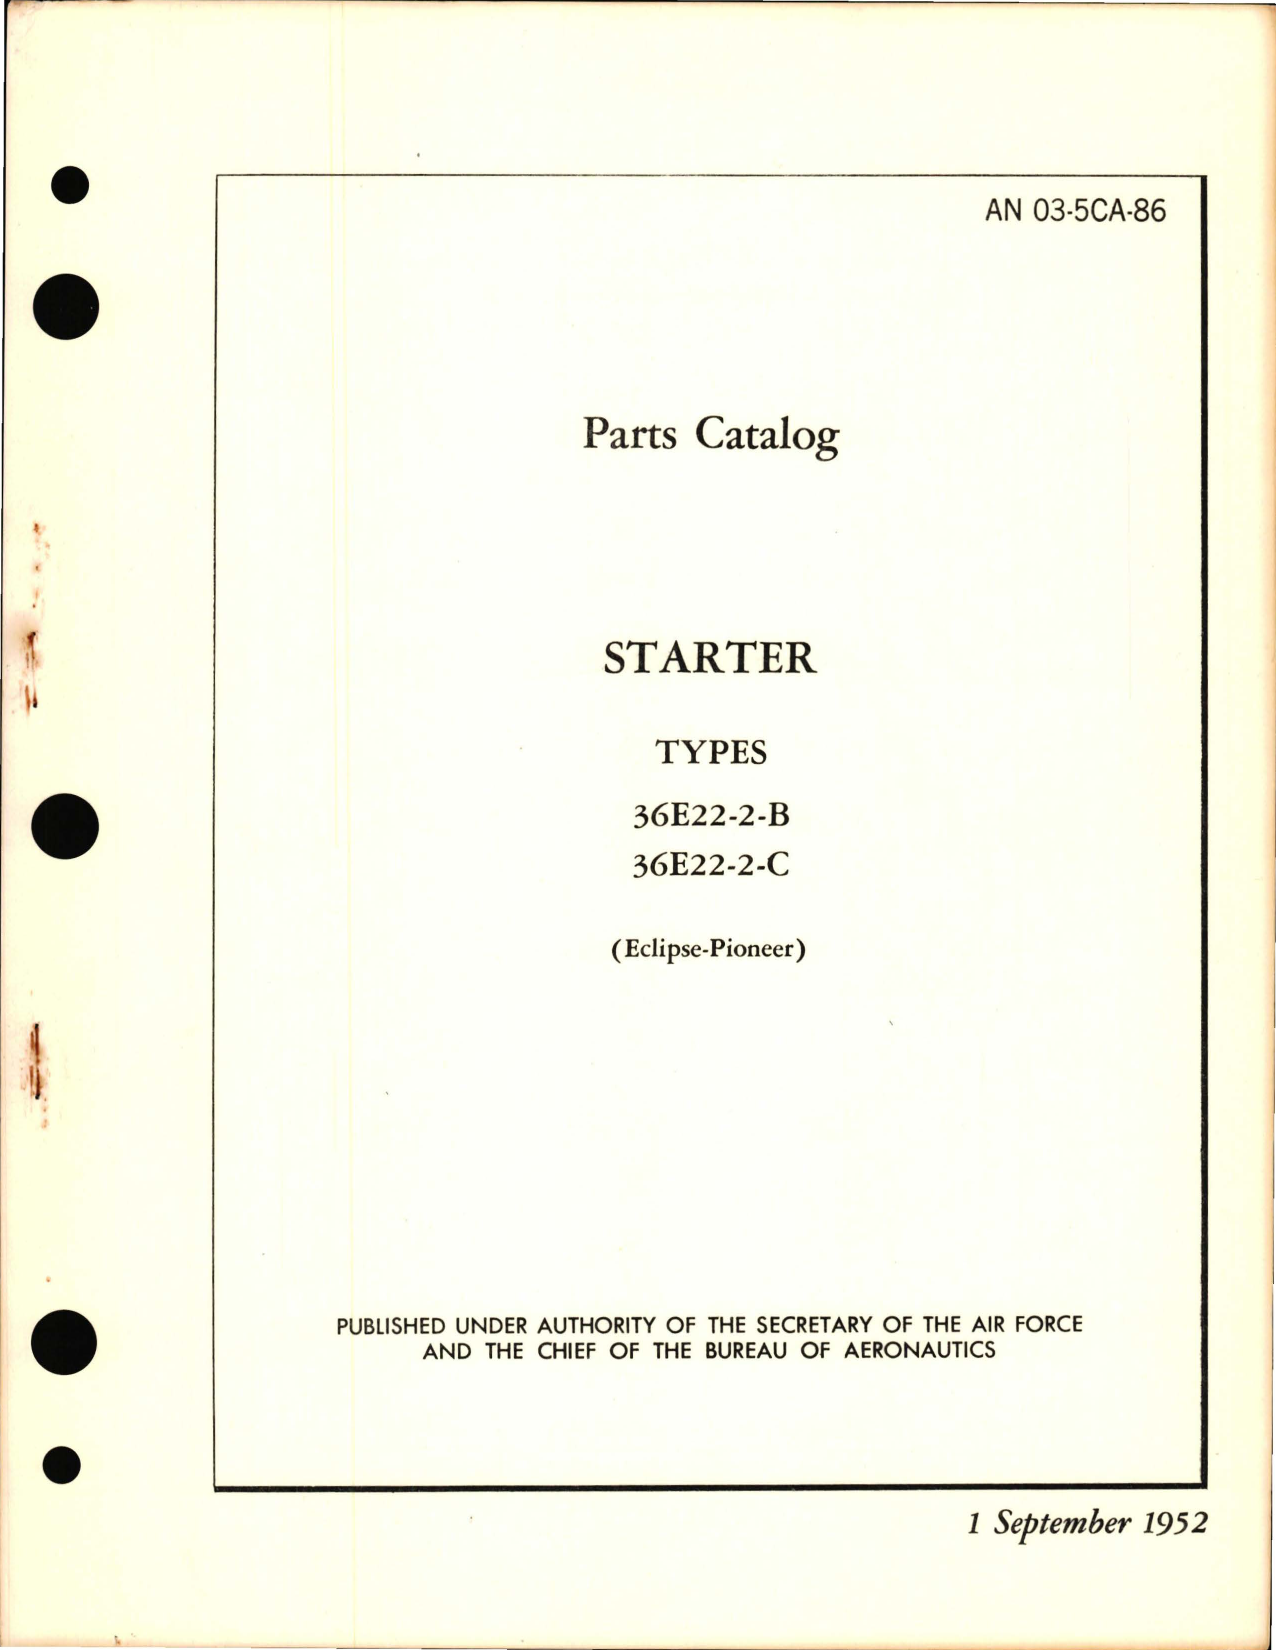 Sample page 1 from AirCorps Library document: Parts Catalog for Starter Types 36E22-2-B and 36E22-2-C 